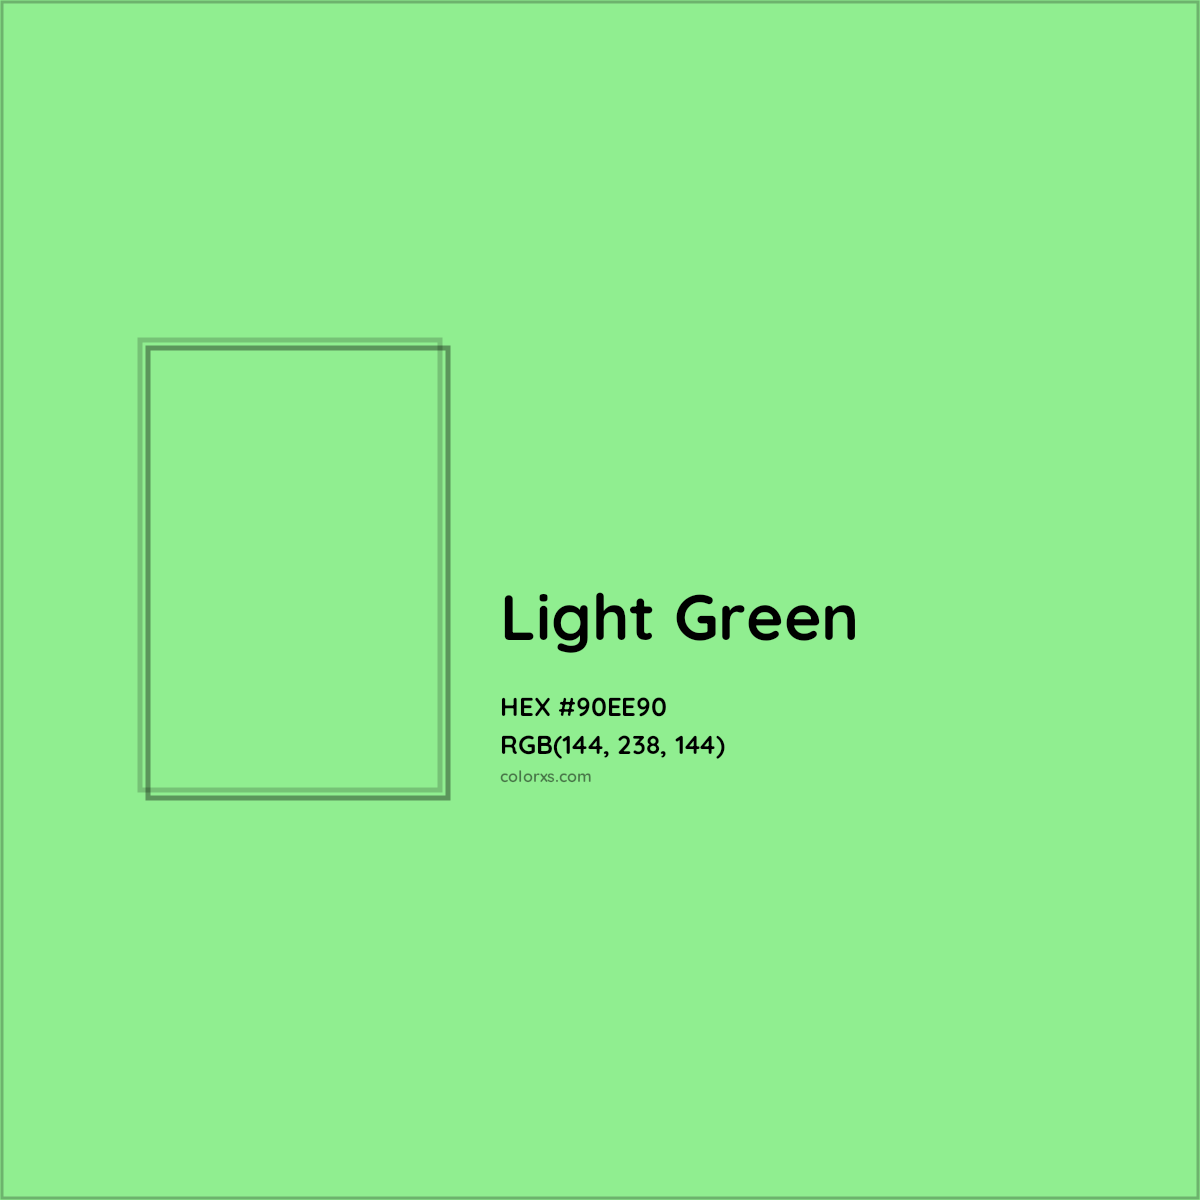 About Light Green - Color codes, similar colors and paints